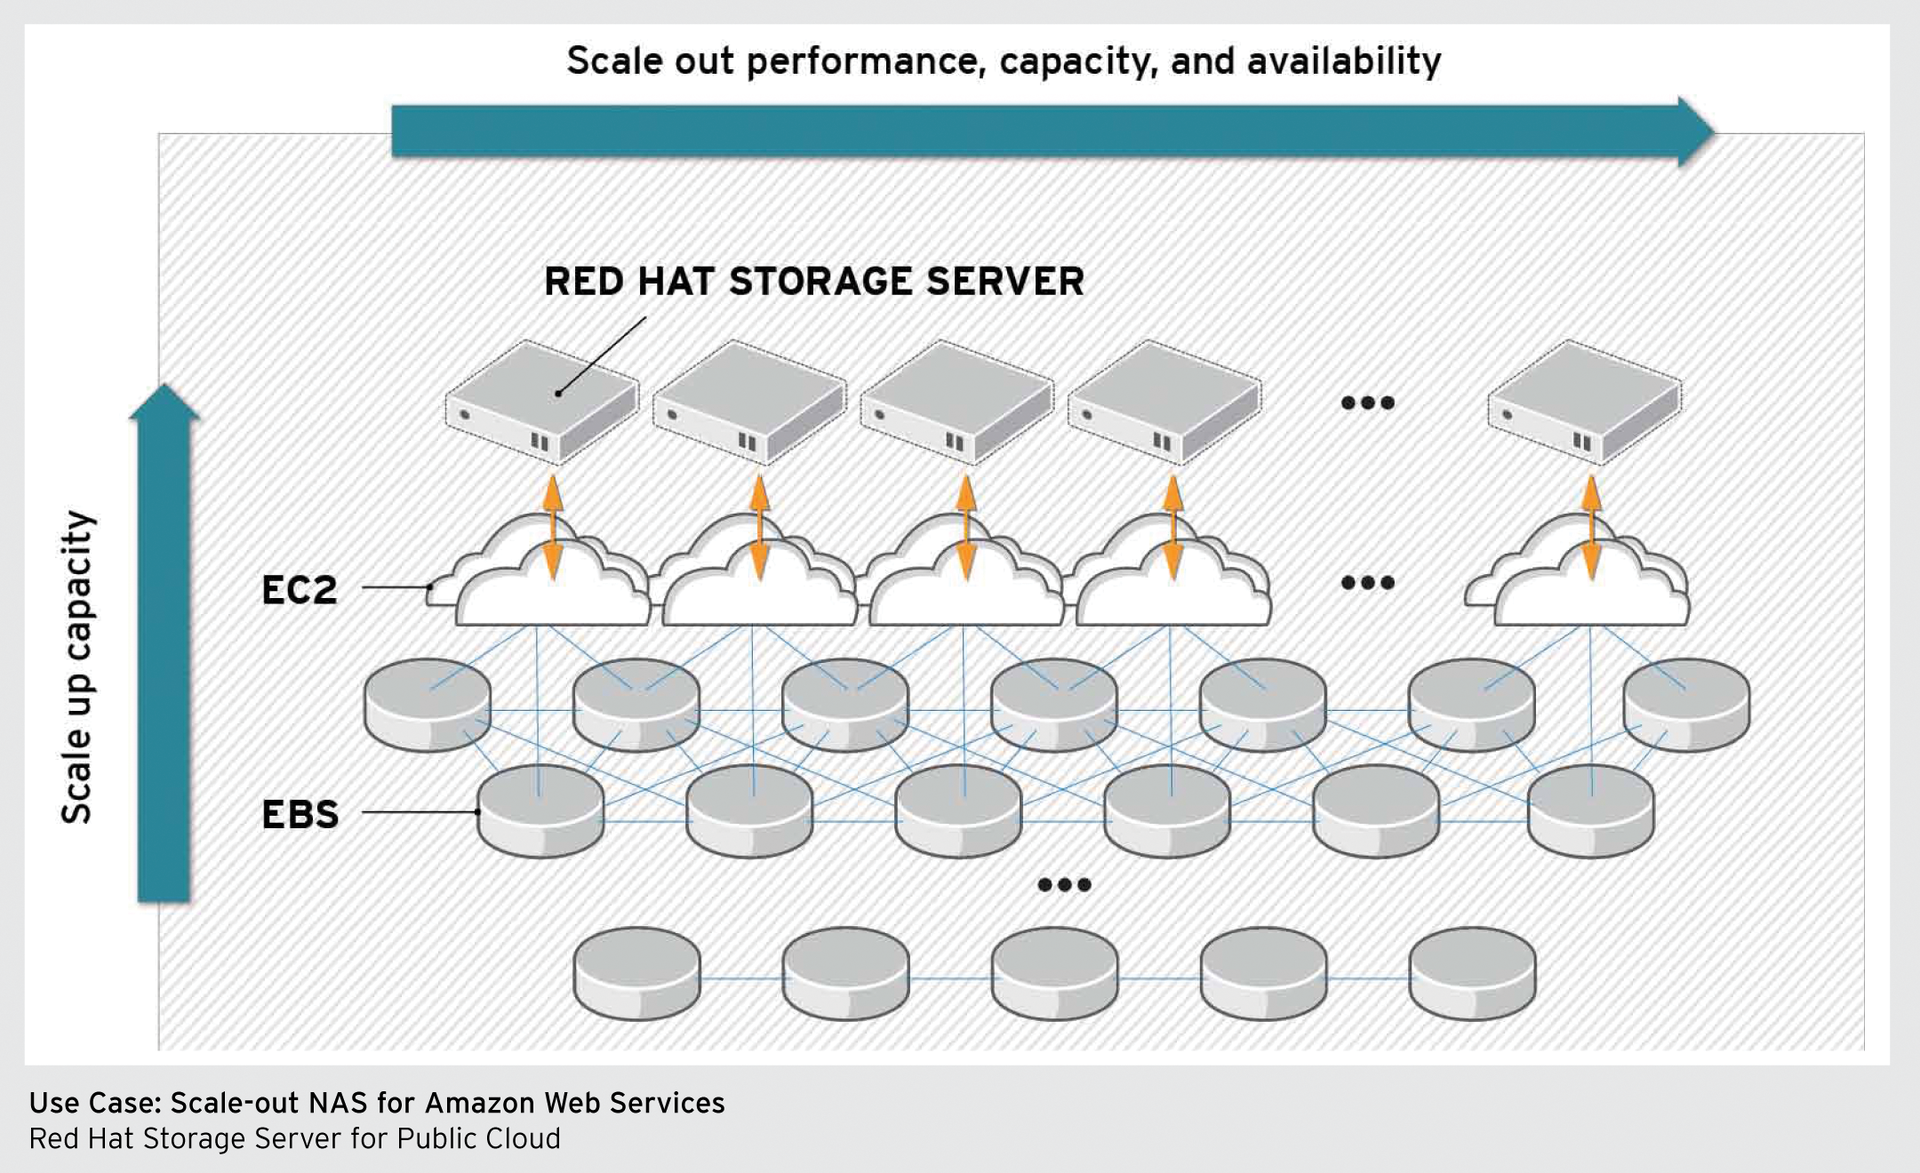 Red Hat Storage Server is available both for on-site use and for use with private and hybrid clouds – here as a scalable NAS for Amazon Web Services. 